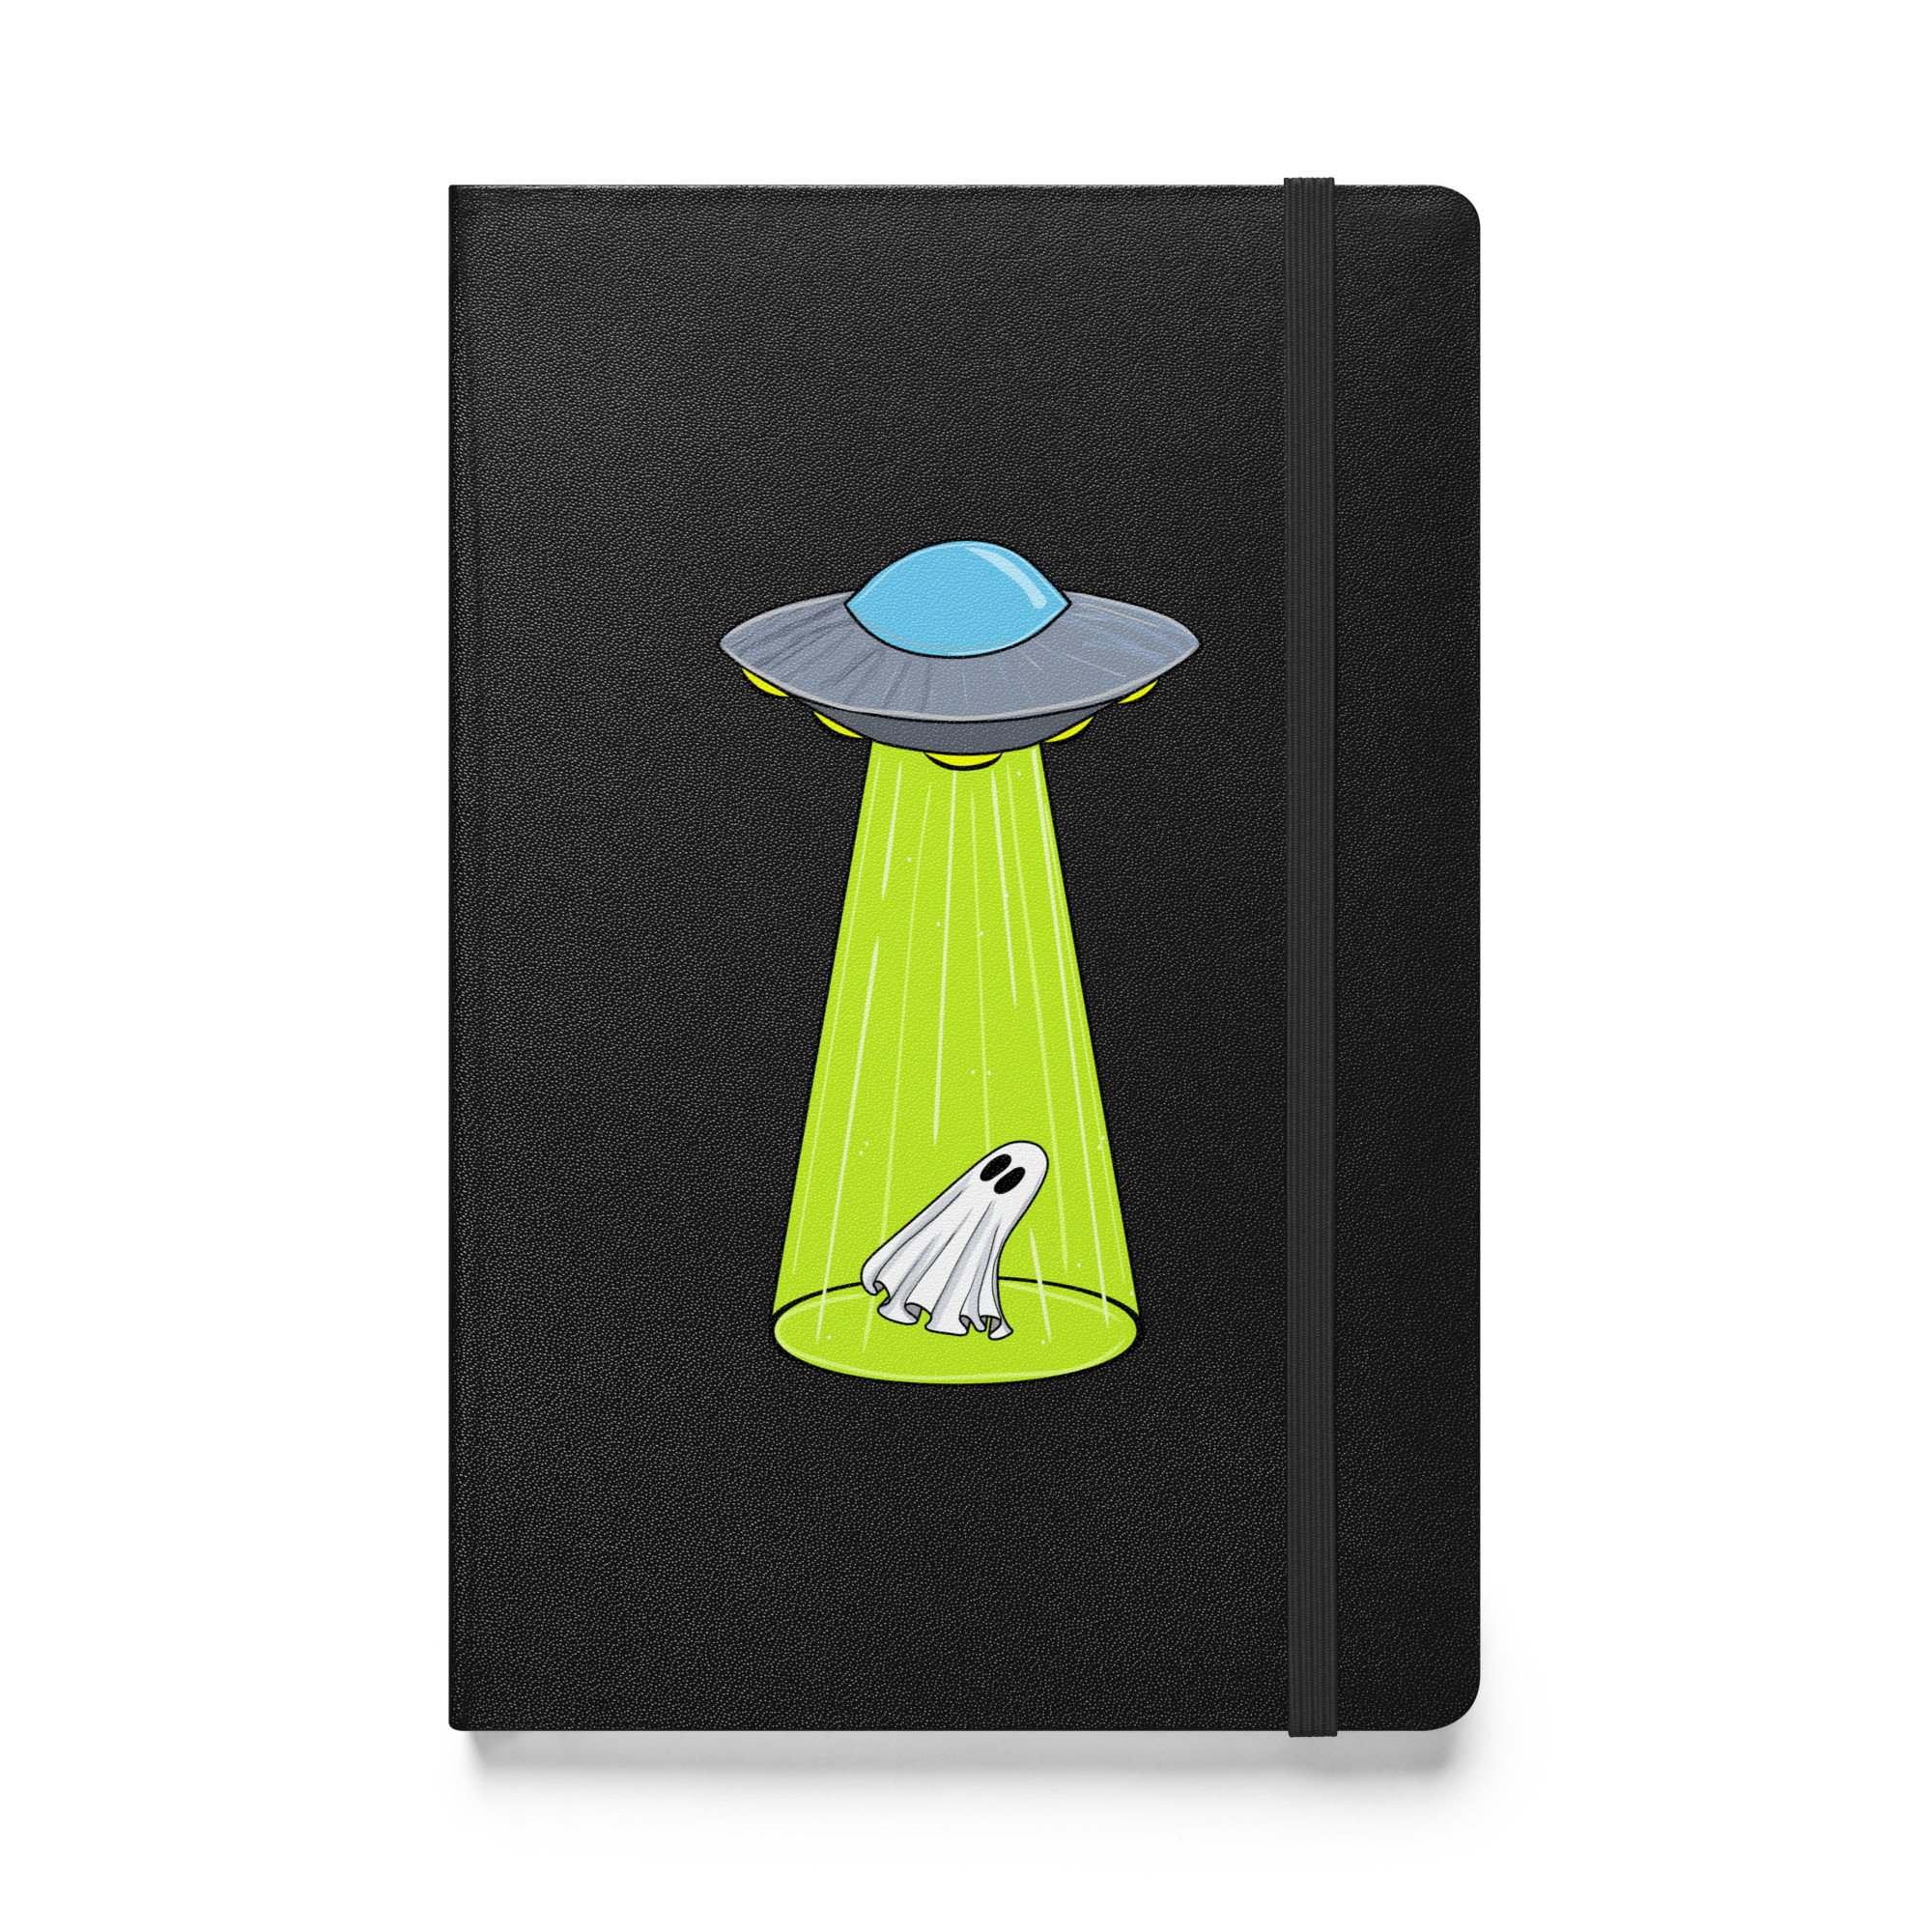 hardcover-bound-notebook-black-front-6537e4544869a.jpg